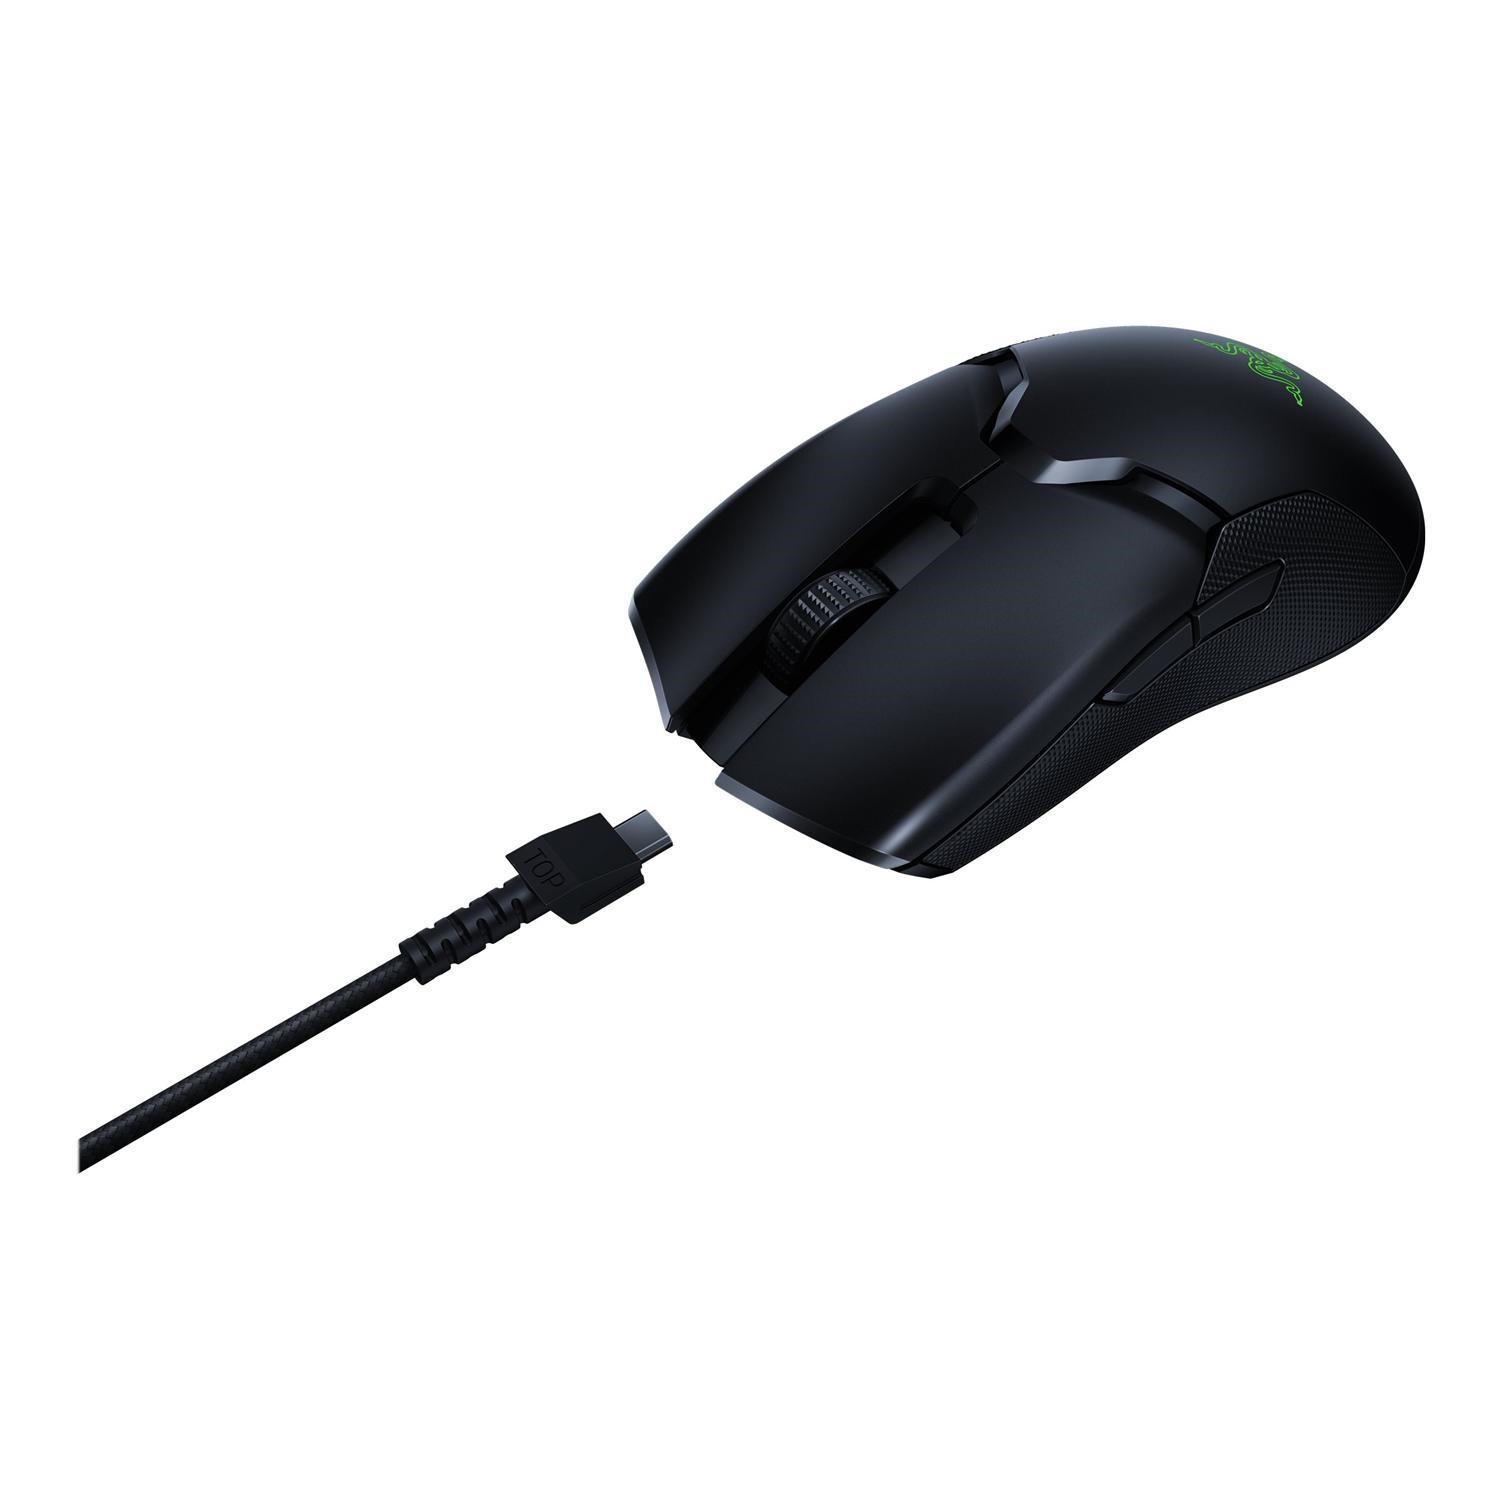 Razer Viper Ultimate Wireless Gaming Mouse - Laptops Direct